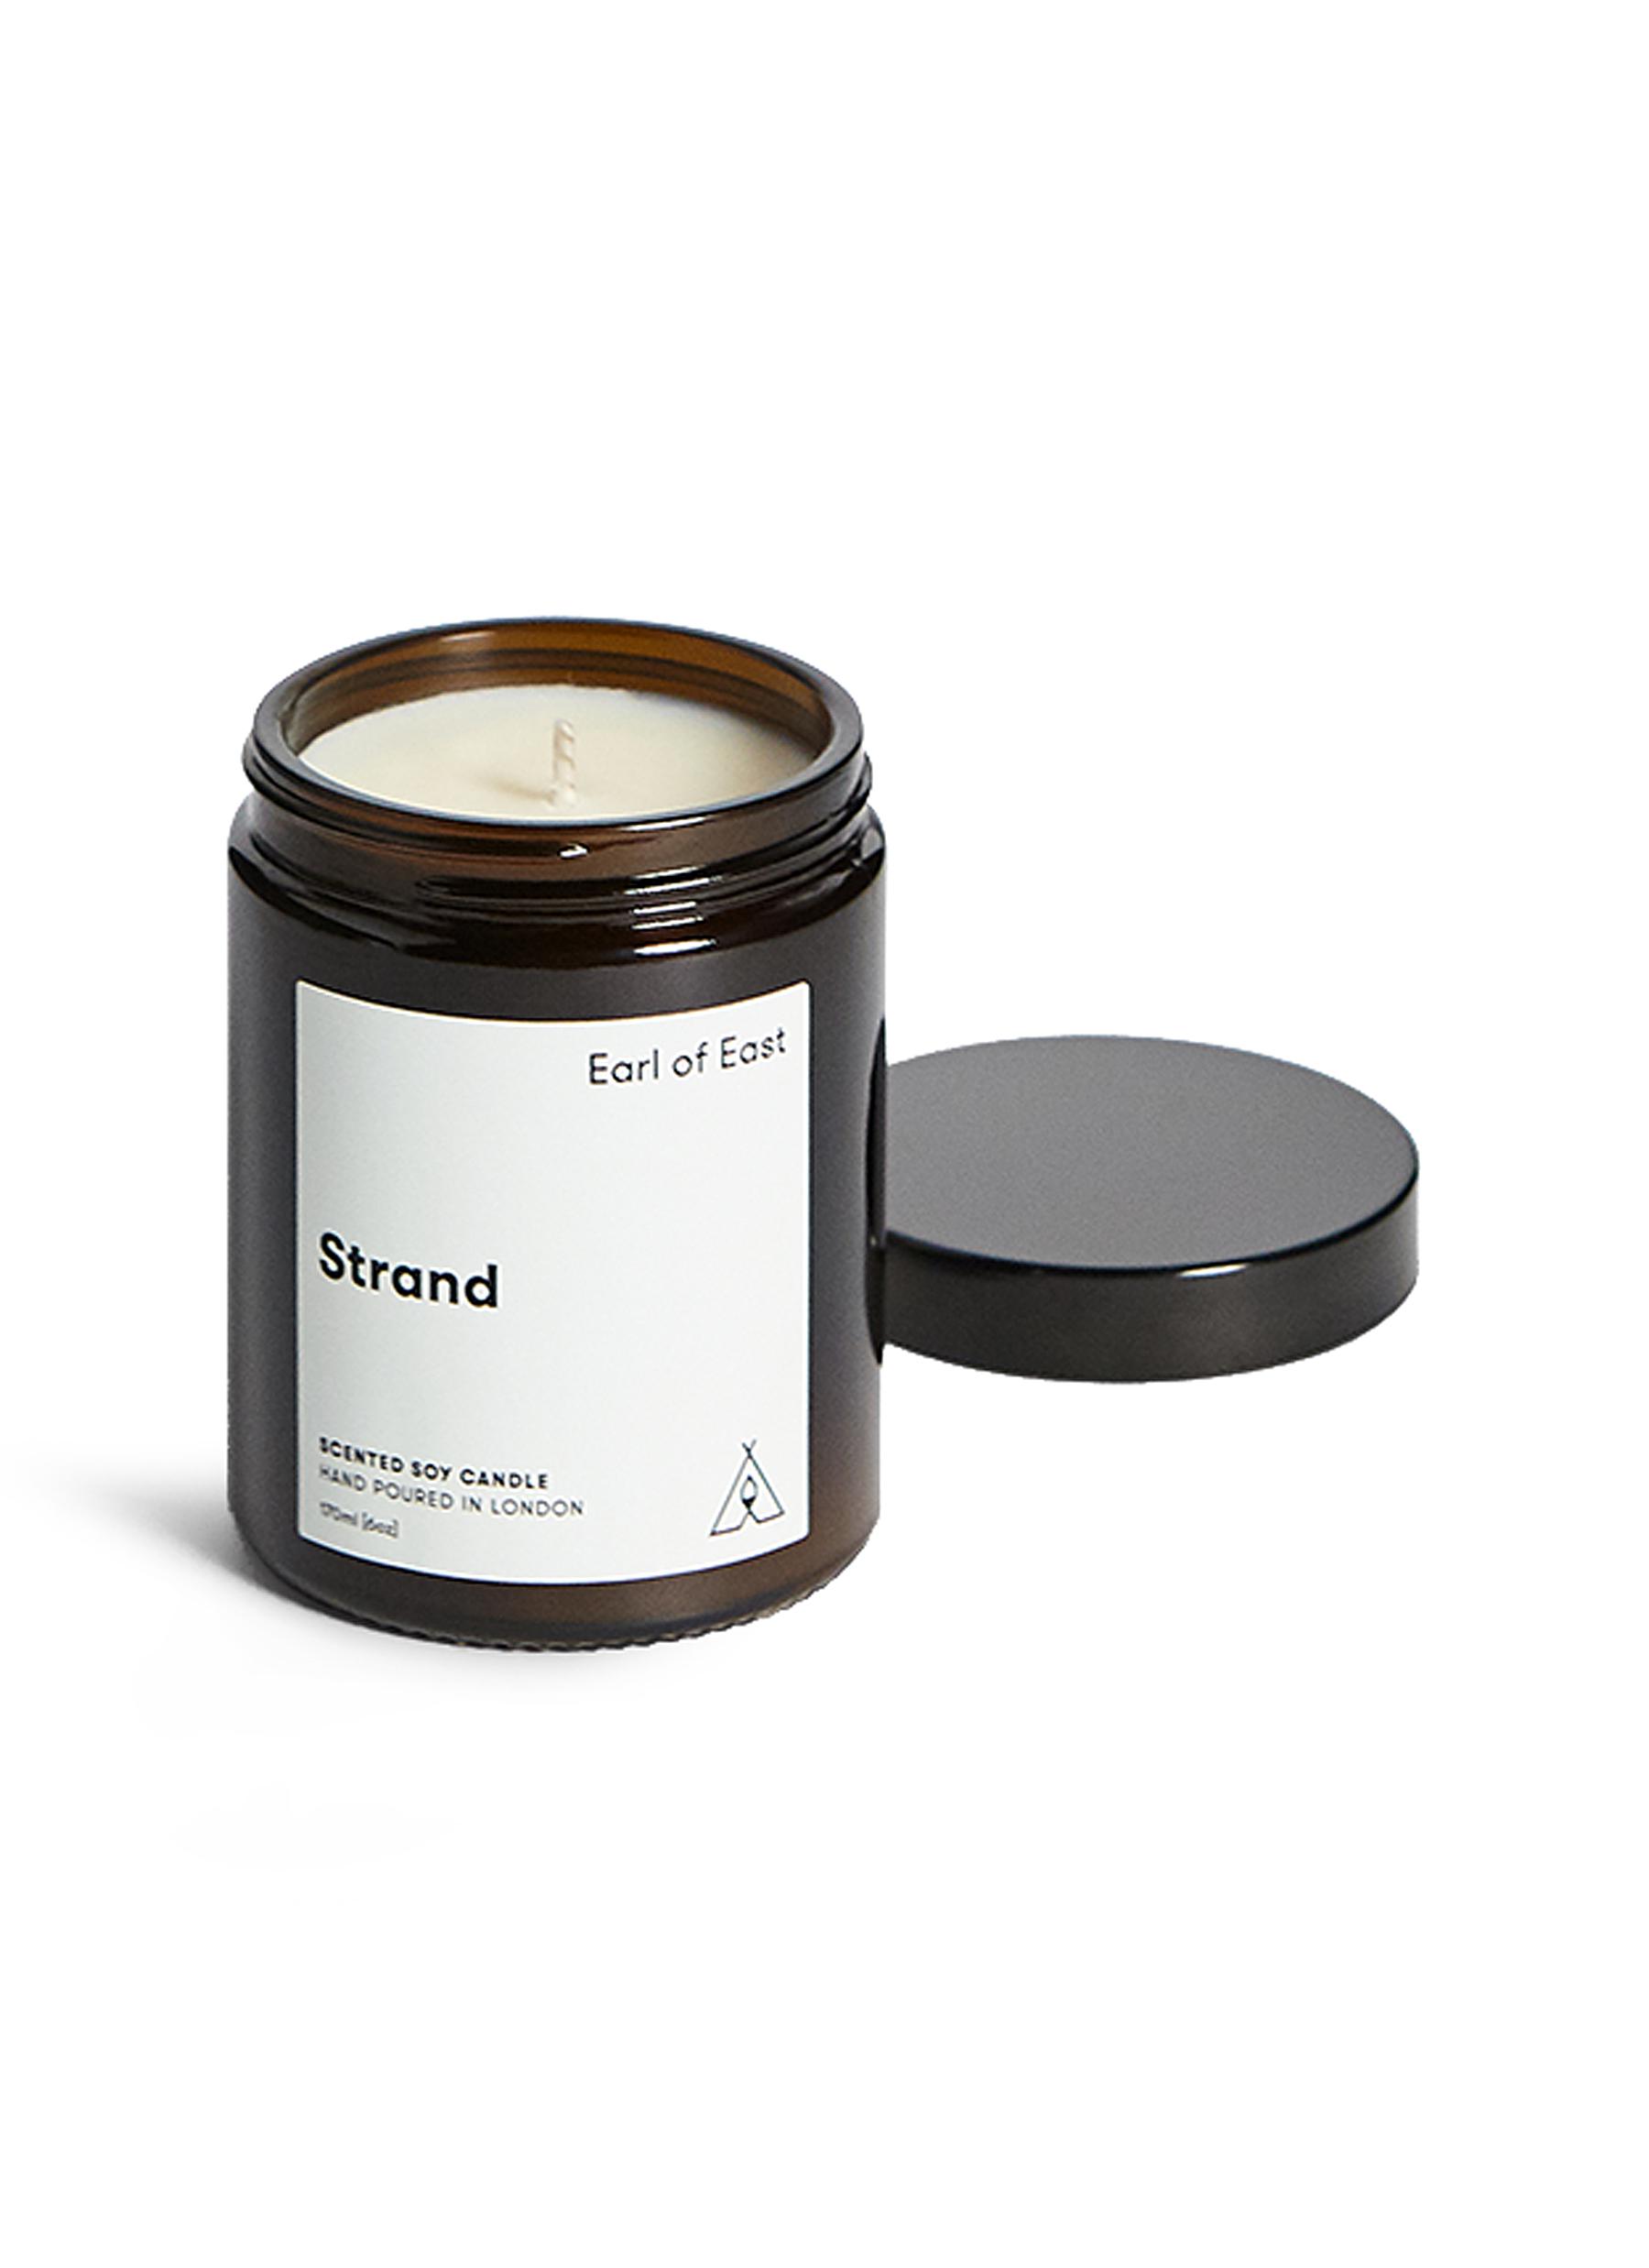 Strand scented soy candle 170ml